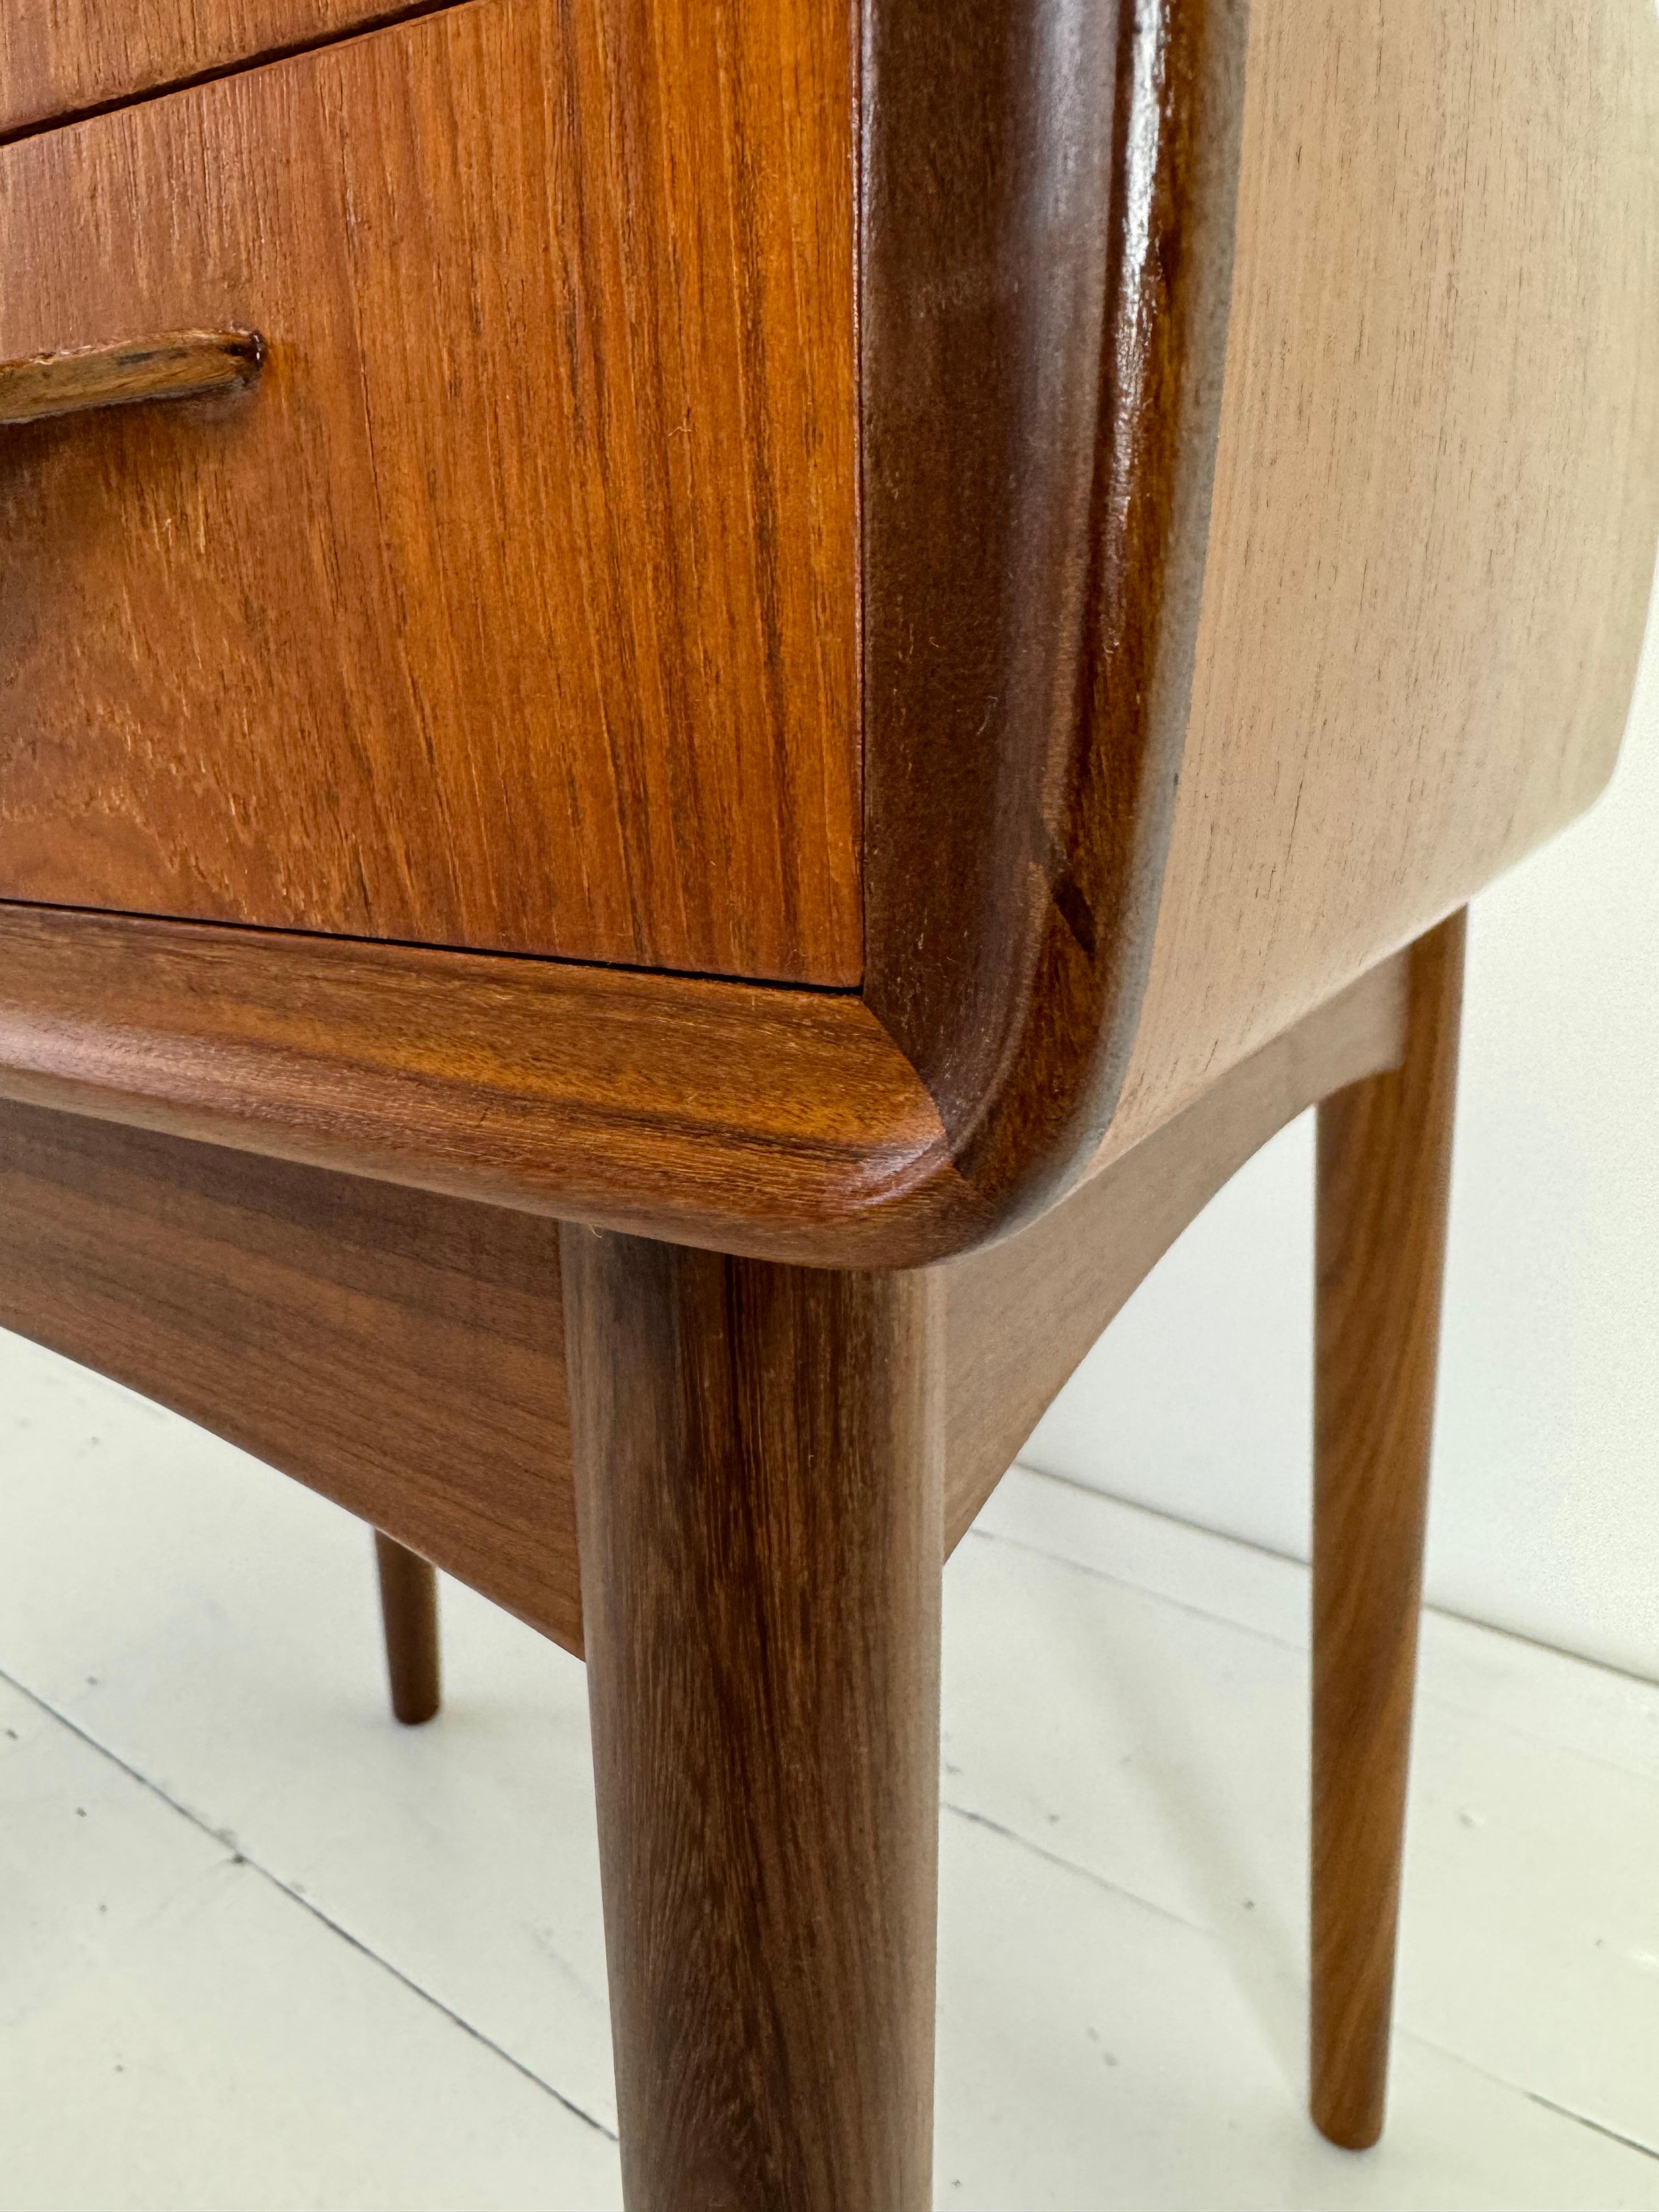 A Pair of Teak Night Stands by Johaness Andersen c.1960's For Sale 2